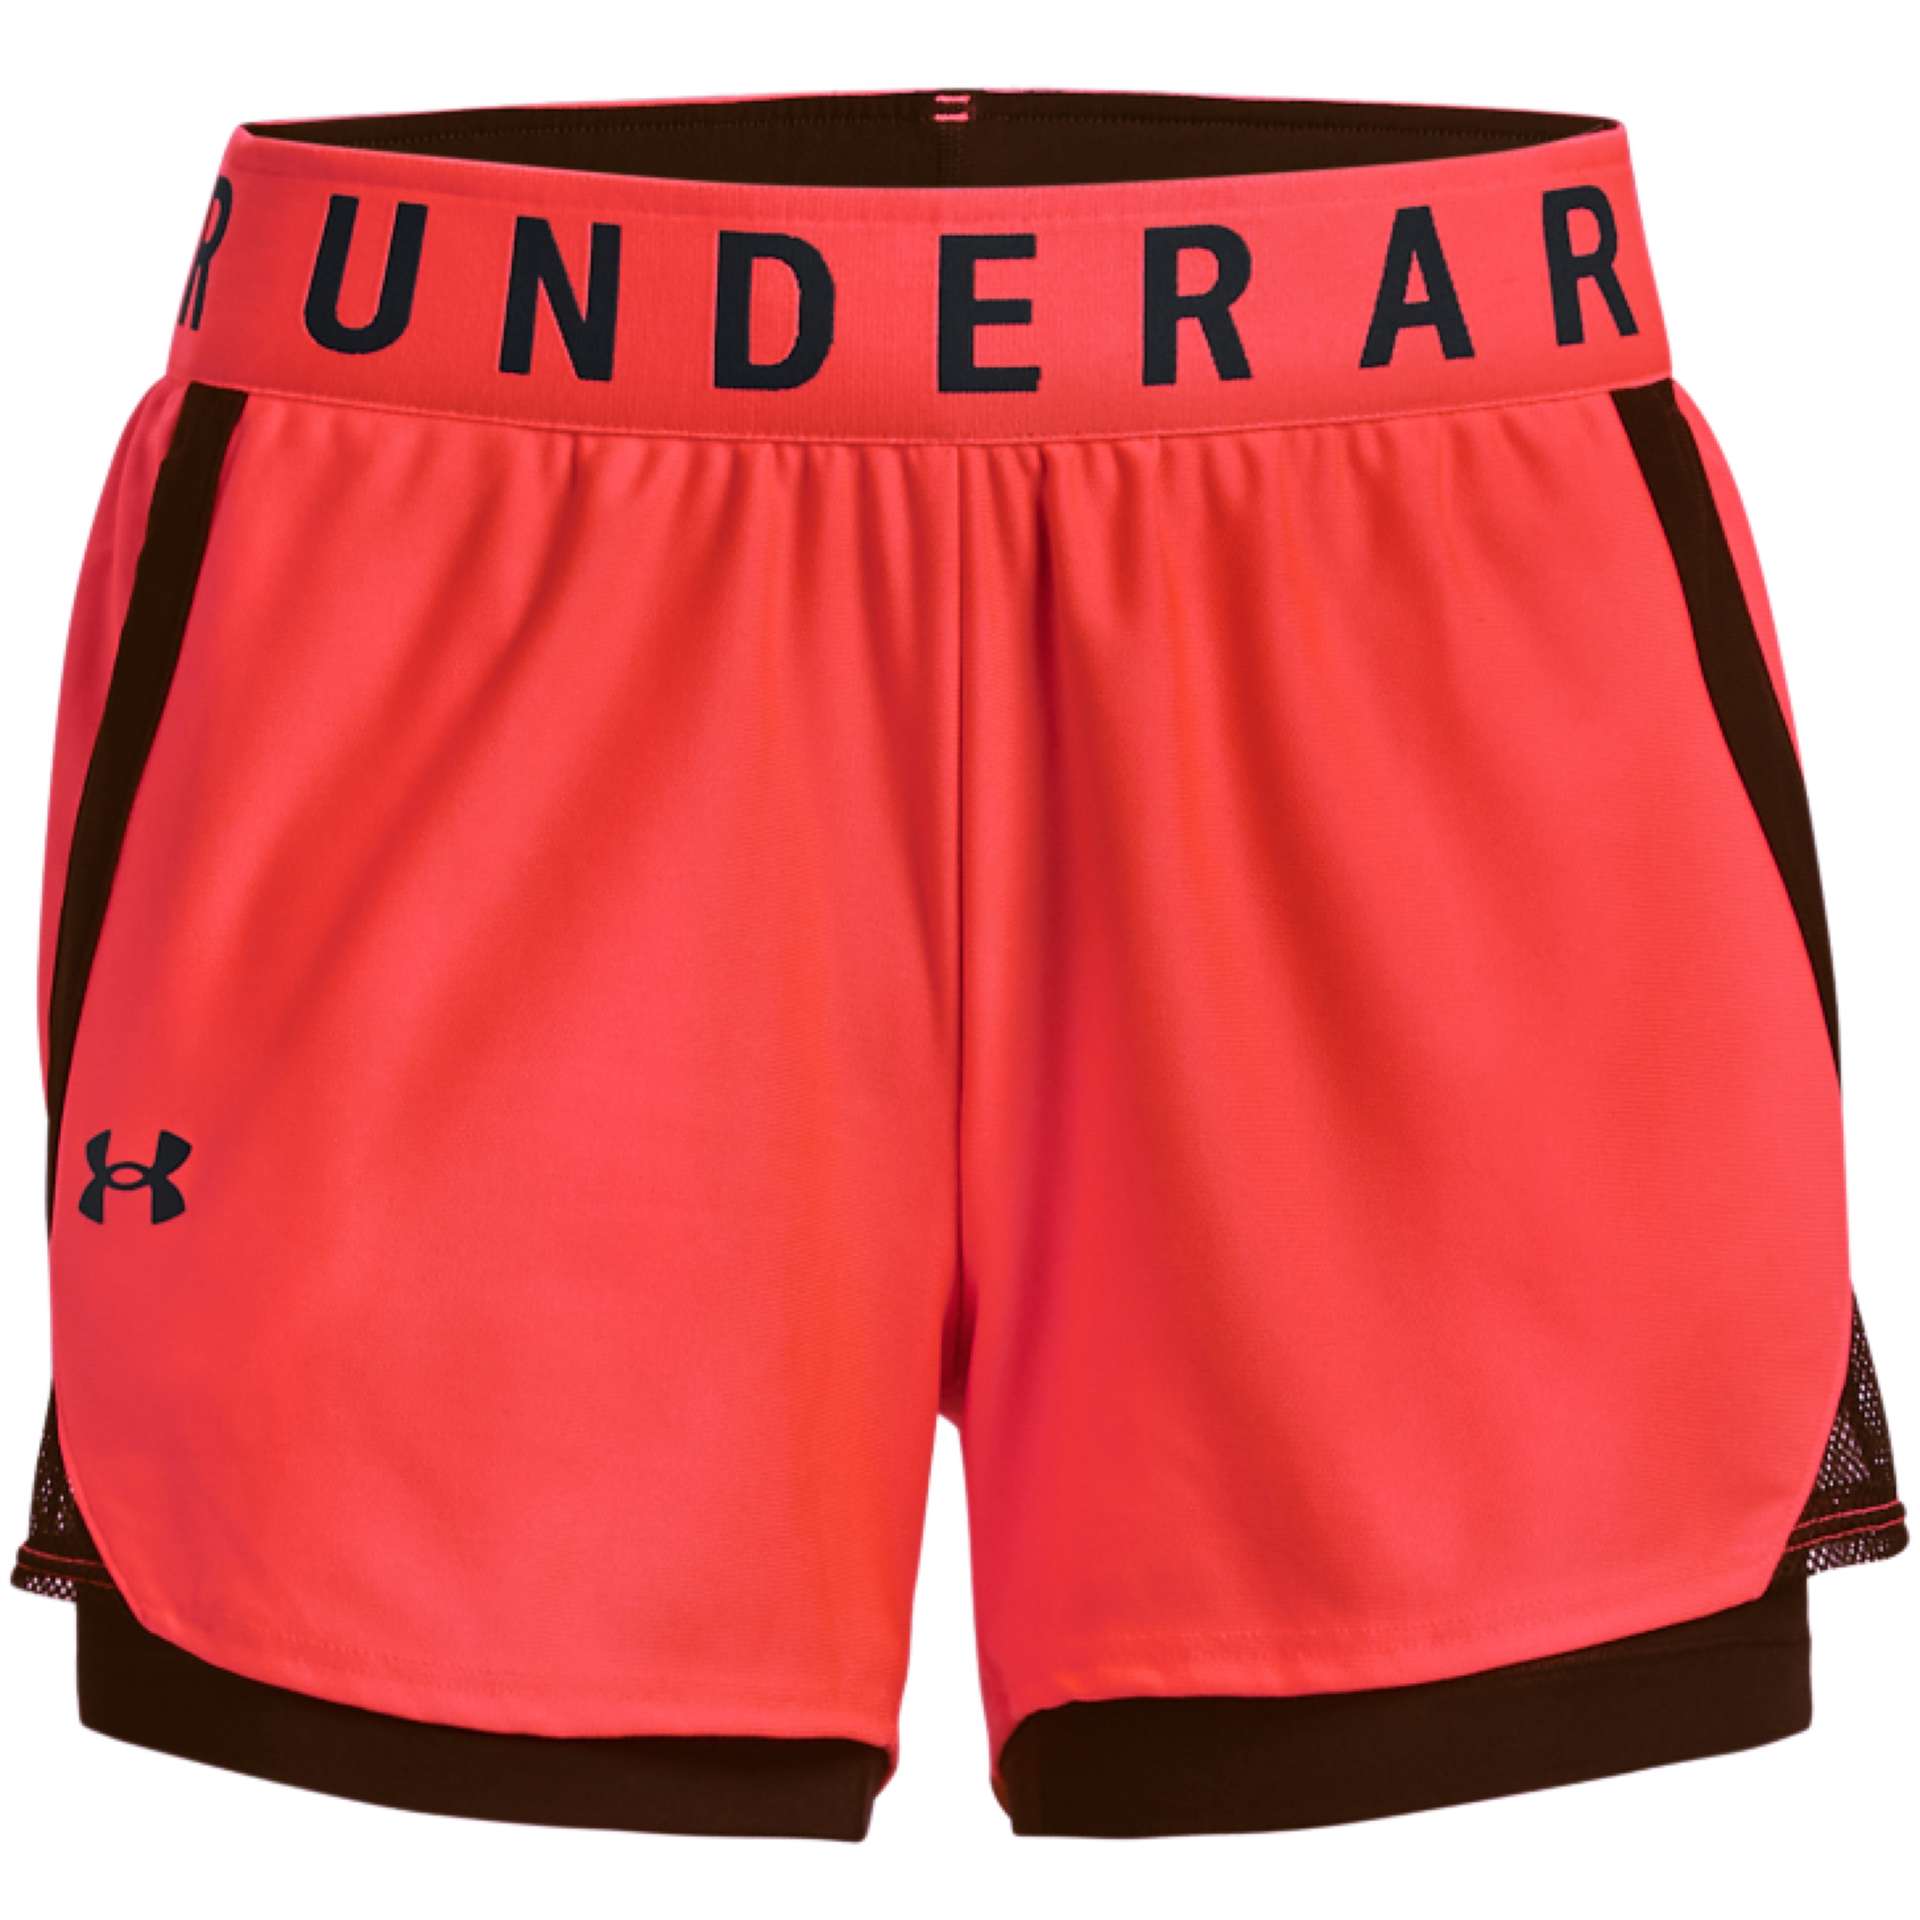 Under Armour Play-up 2 in 1 Kvinde Shorts